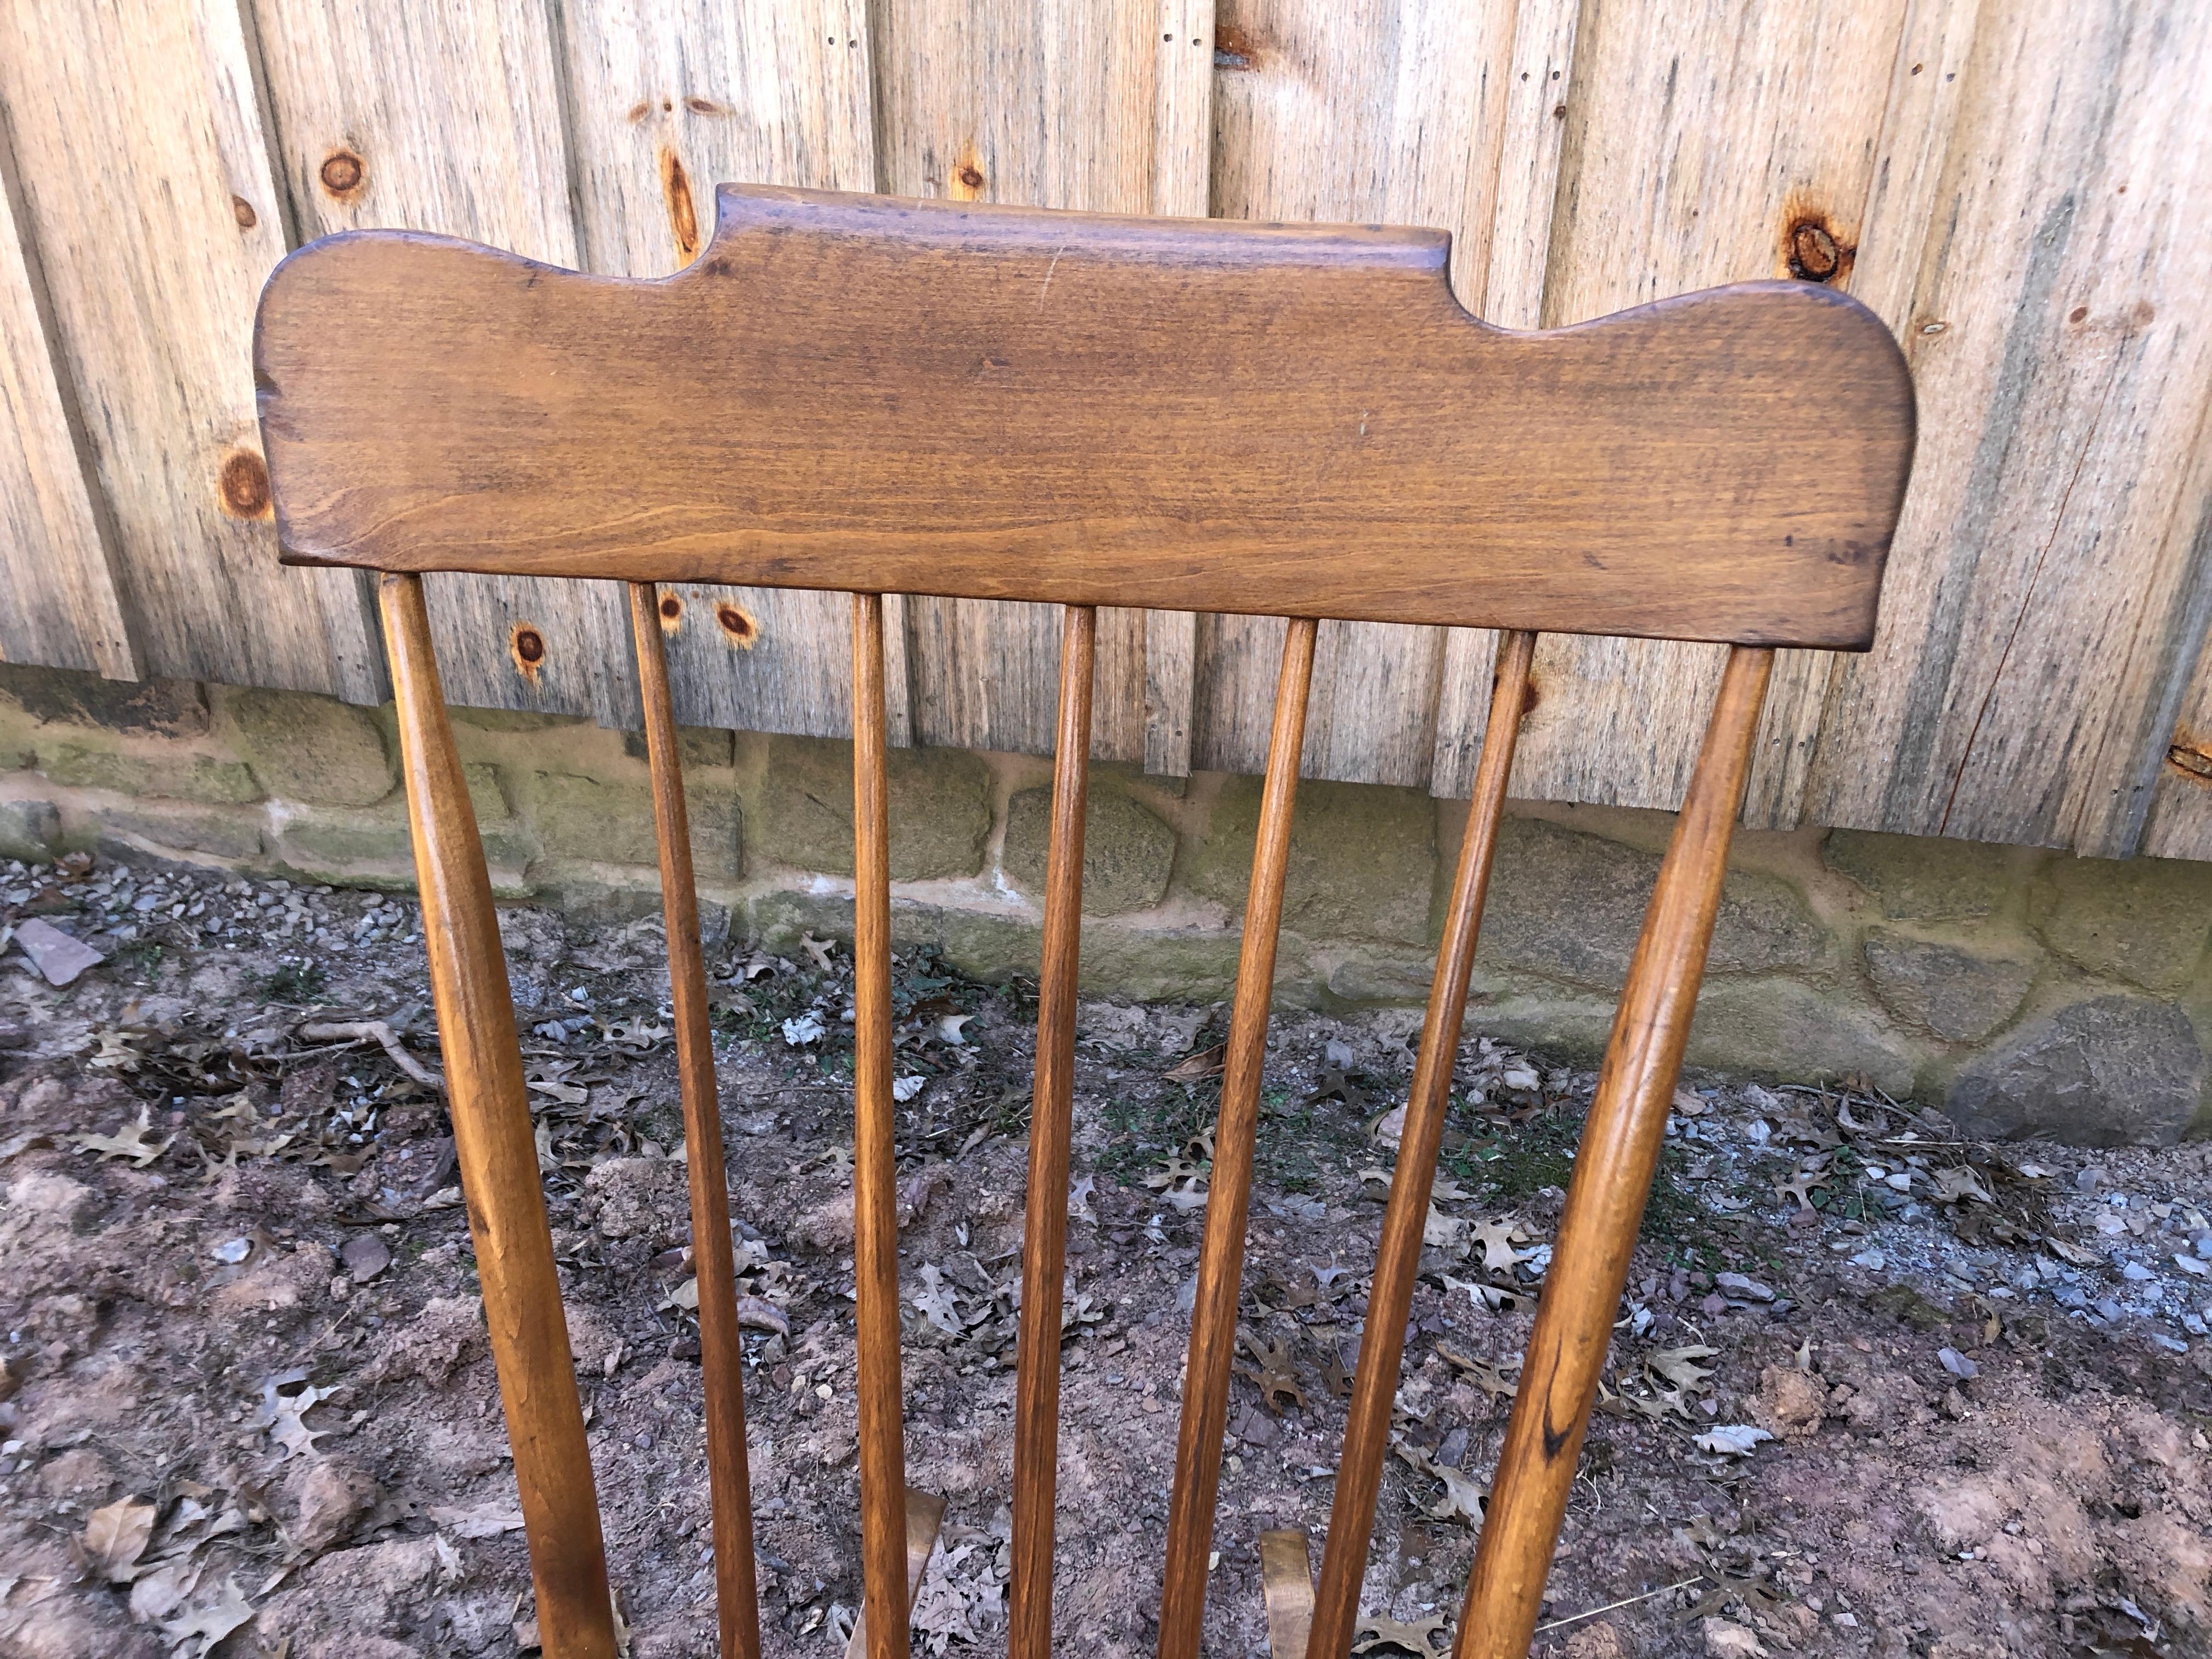 Vintage handmade wooden rocking chair, low to the ground, having a slab seat and elongated spindle back.